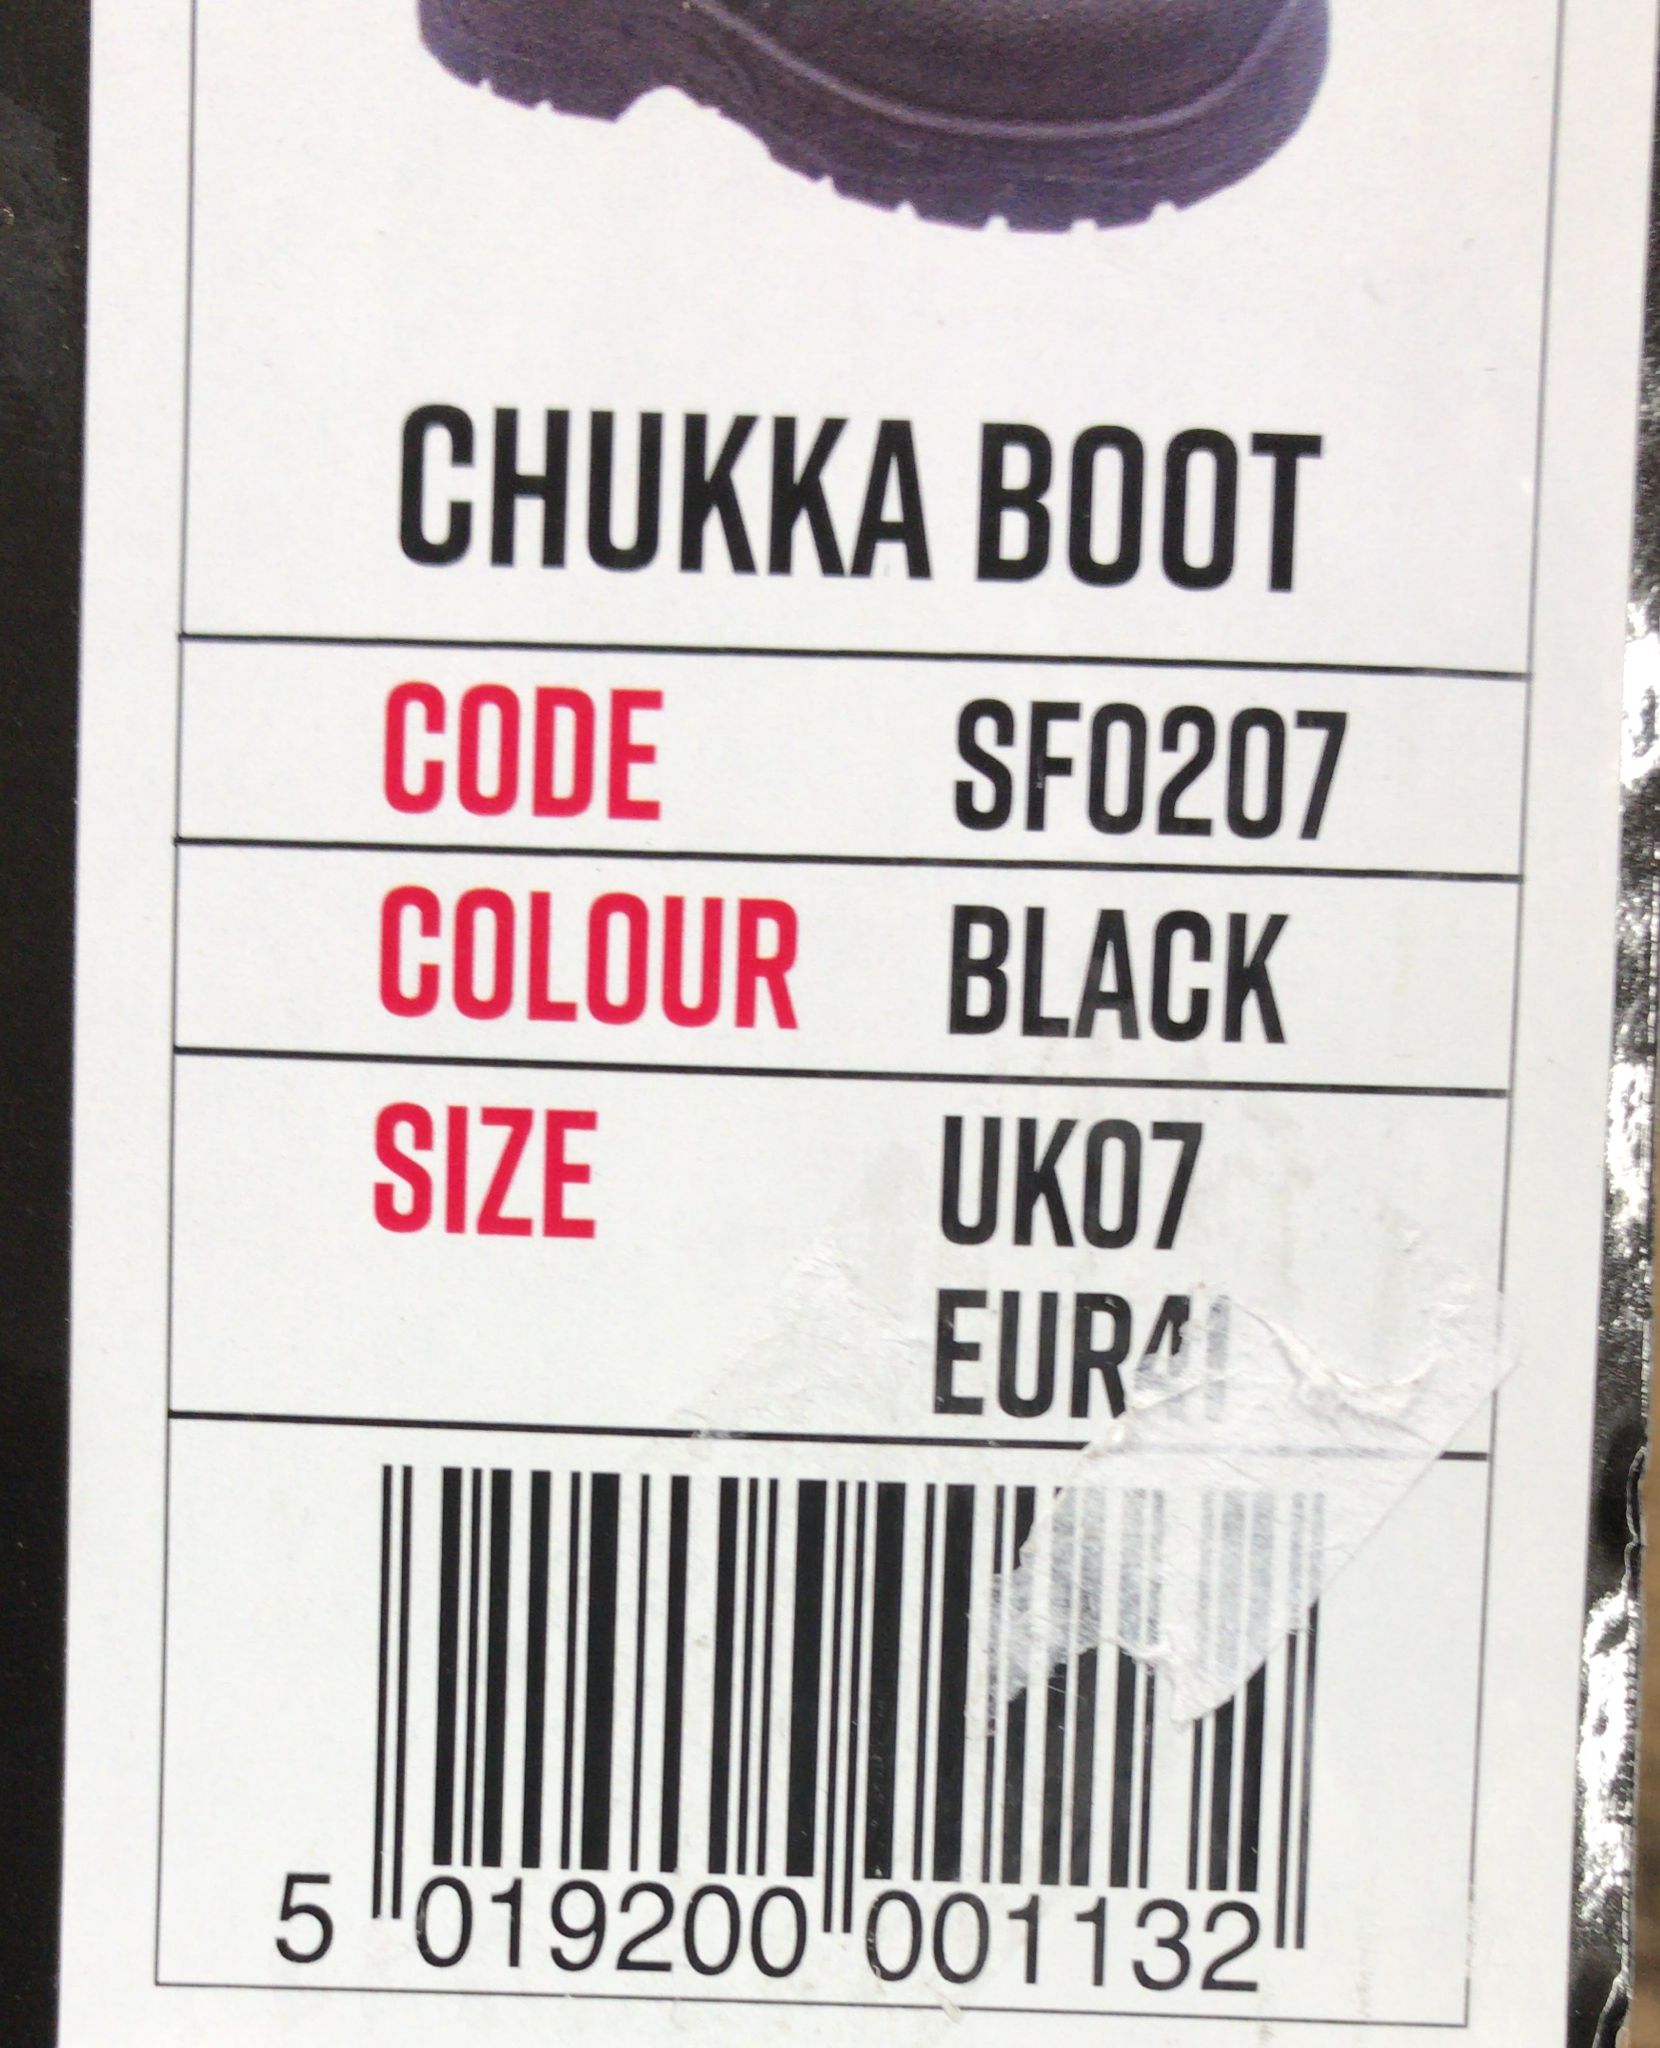 Blackrock Chukka Work Boots, Safety Boots, Safety Shoes Mens Womens, Men's Work & Utility Footwear, Steel Toe Cap Boots, Non Slip, Lightweight, Ladies, Working Boots, Construction, Security - Size 7 1132